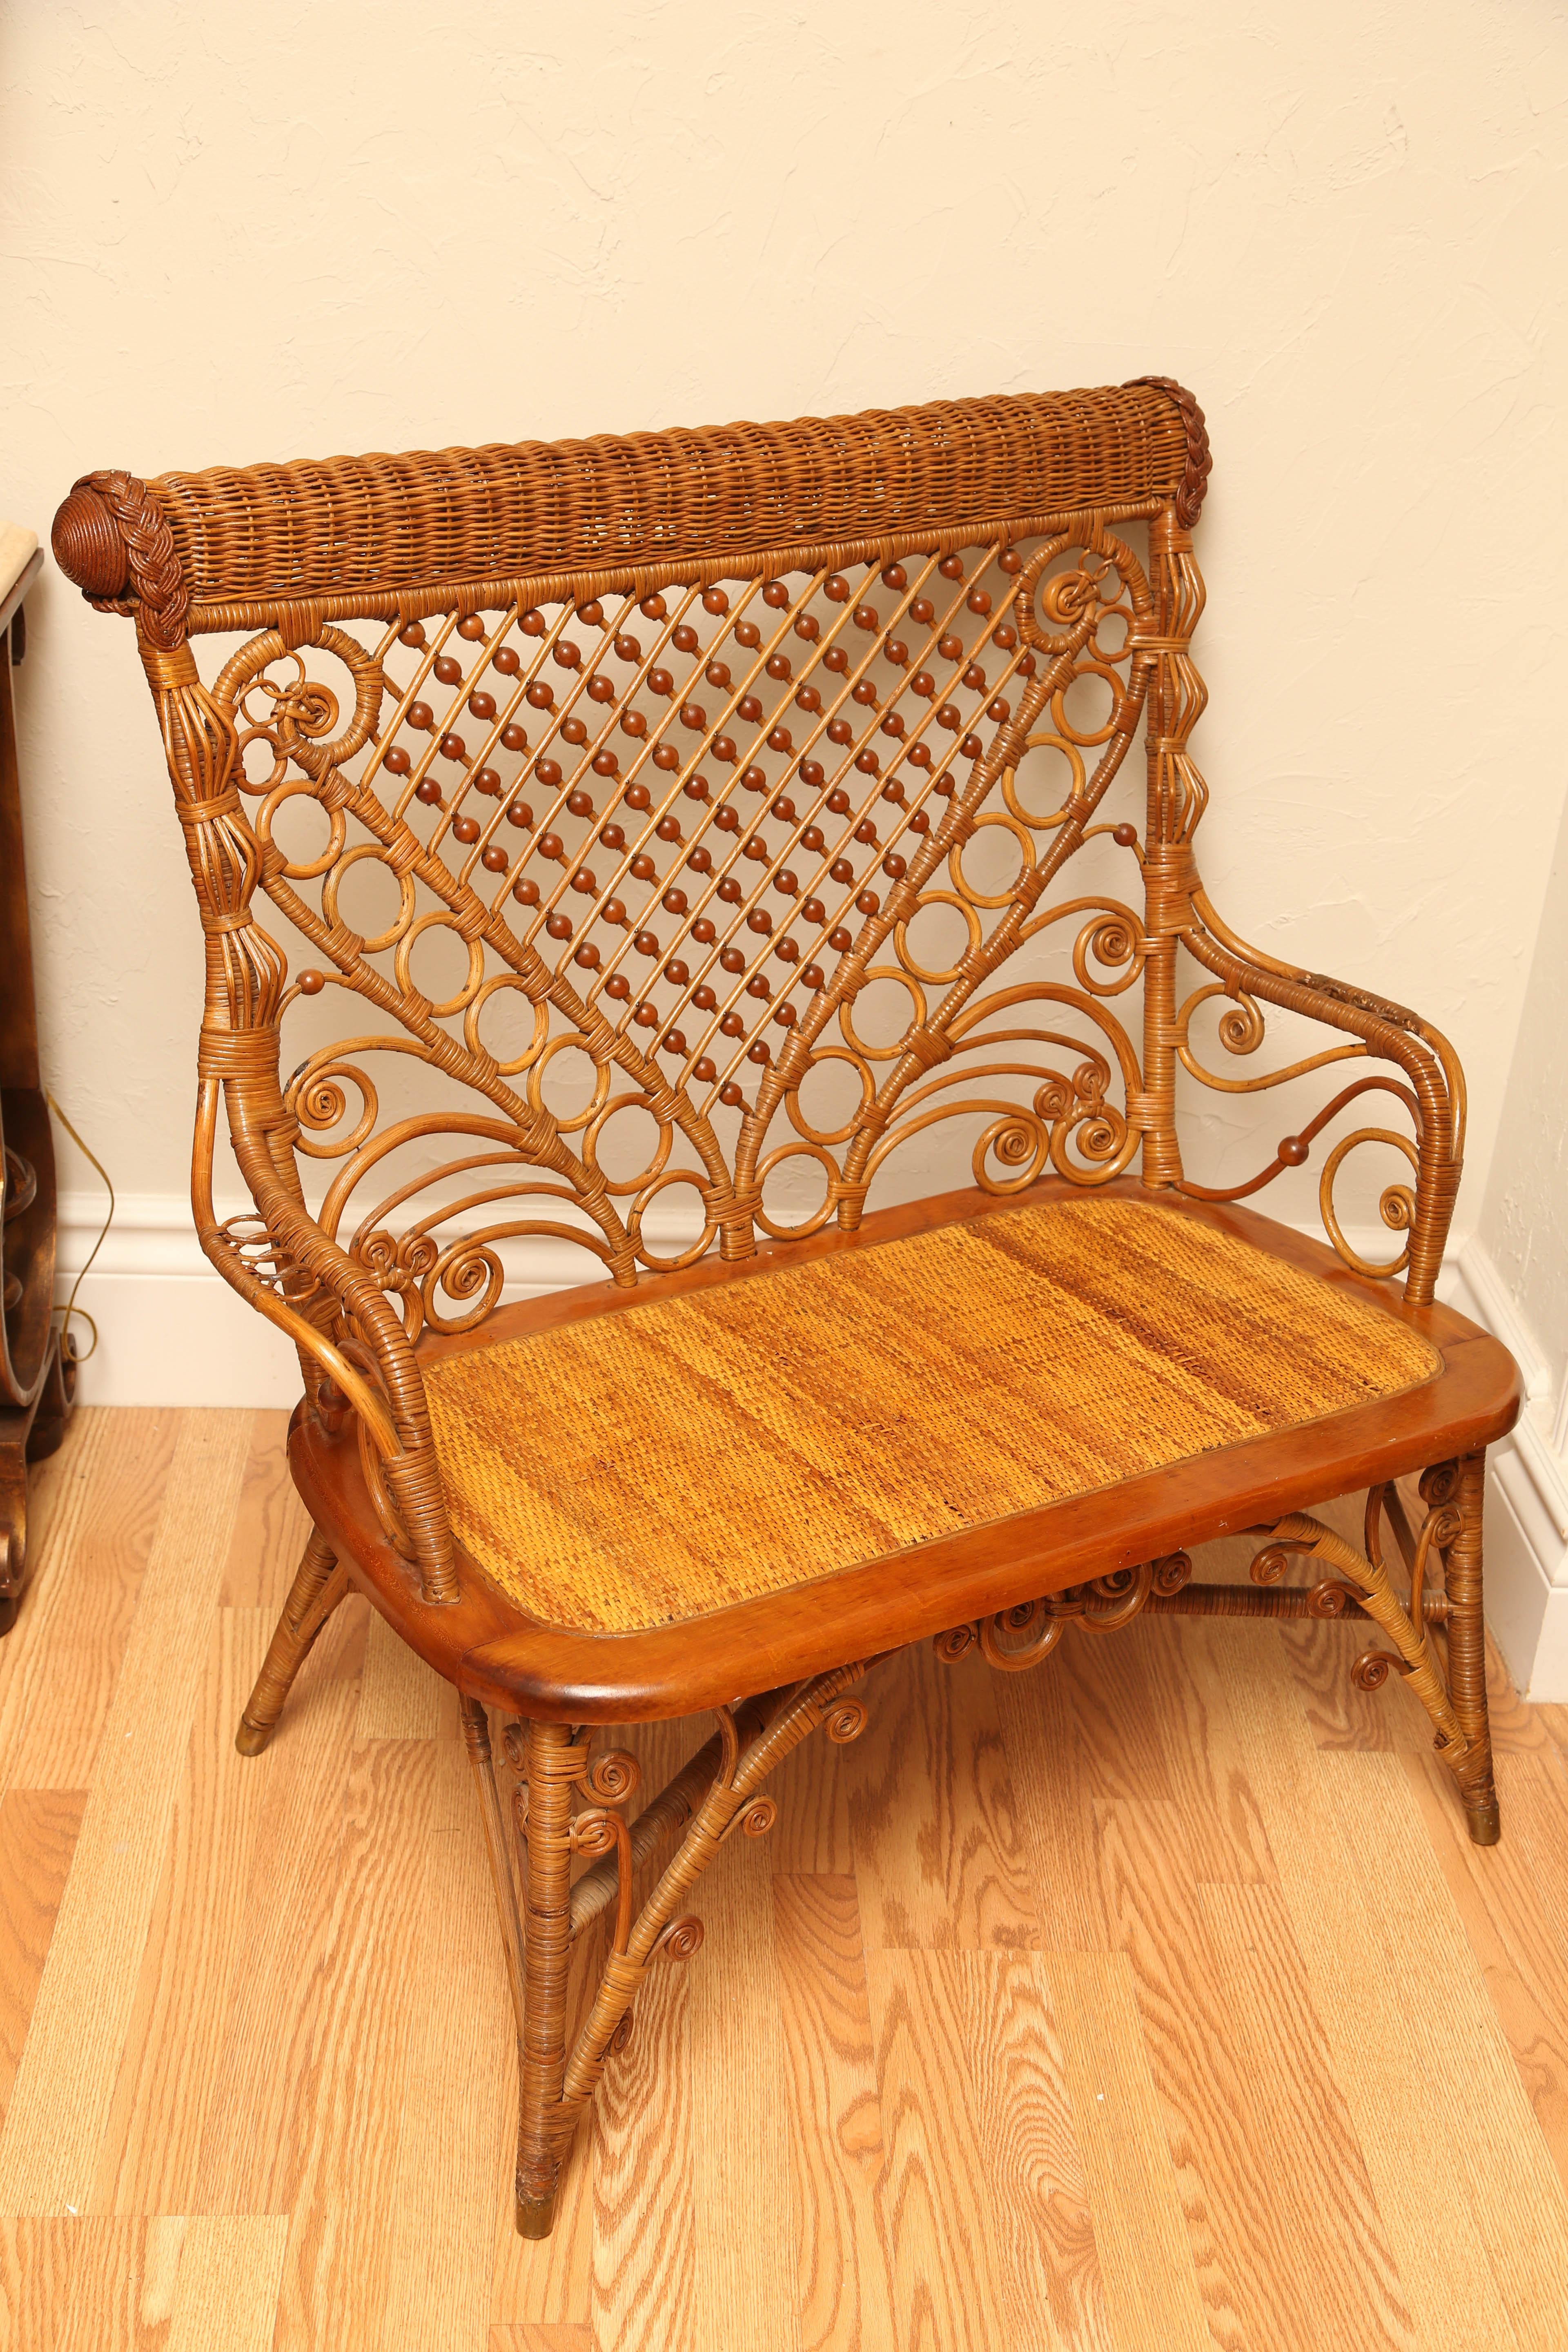 19th Century Antique Wicker and Rattan Settee